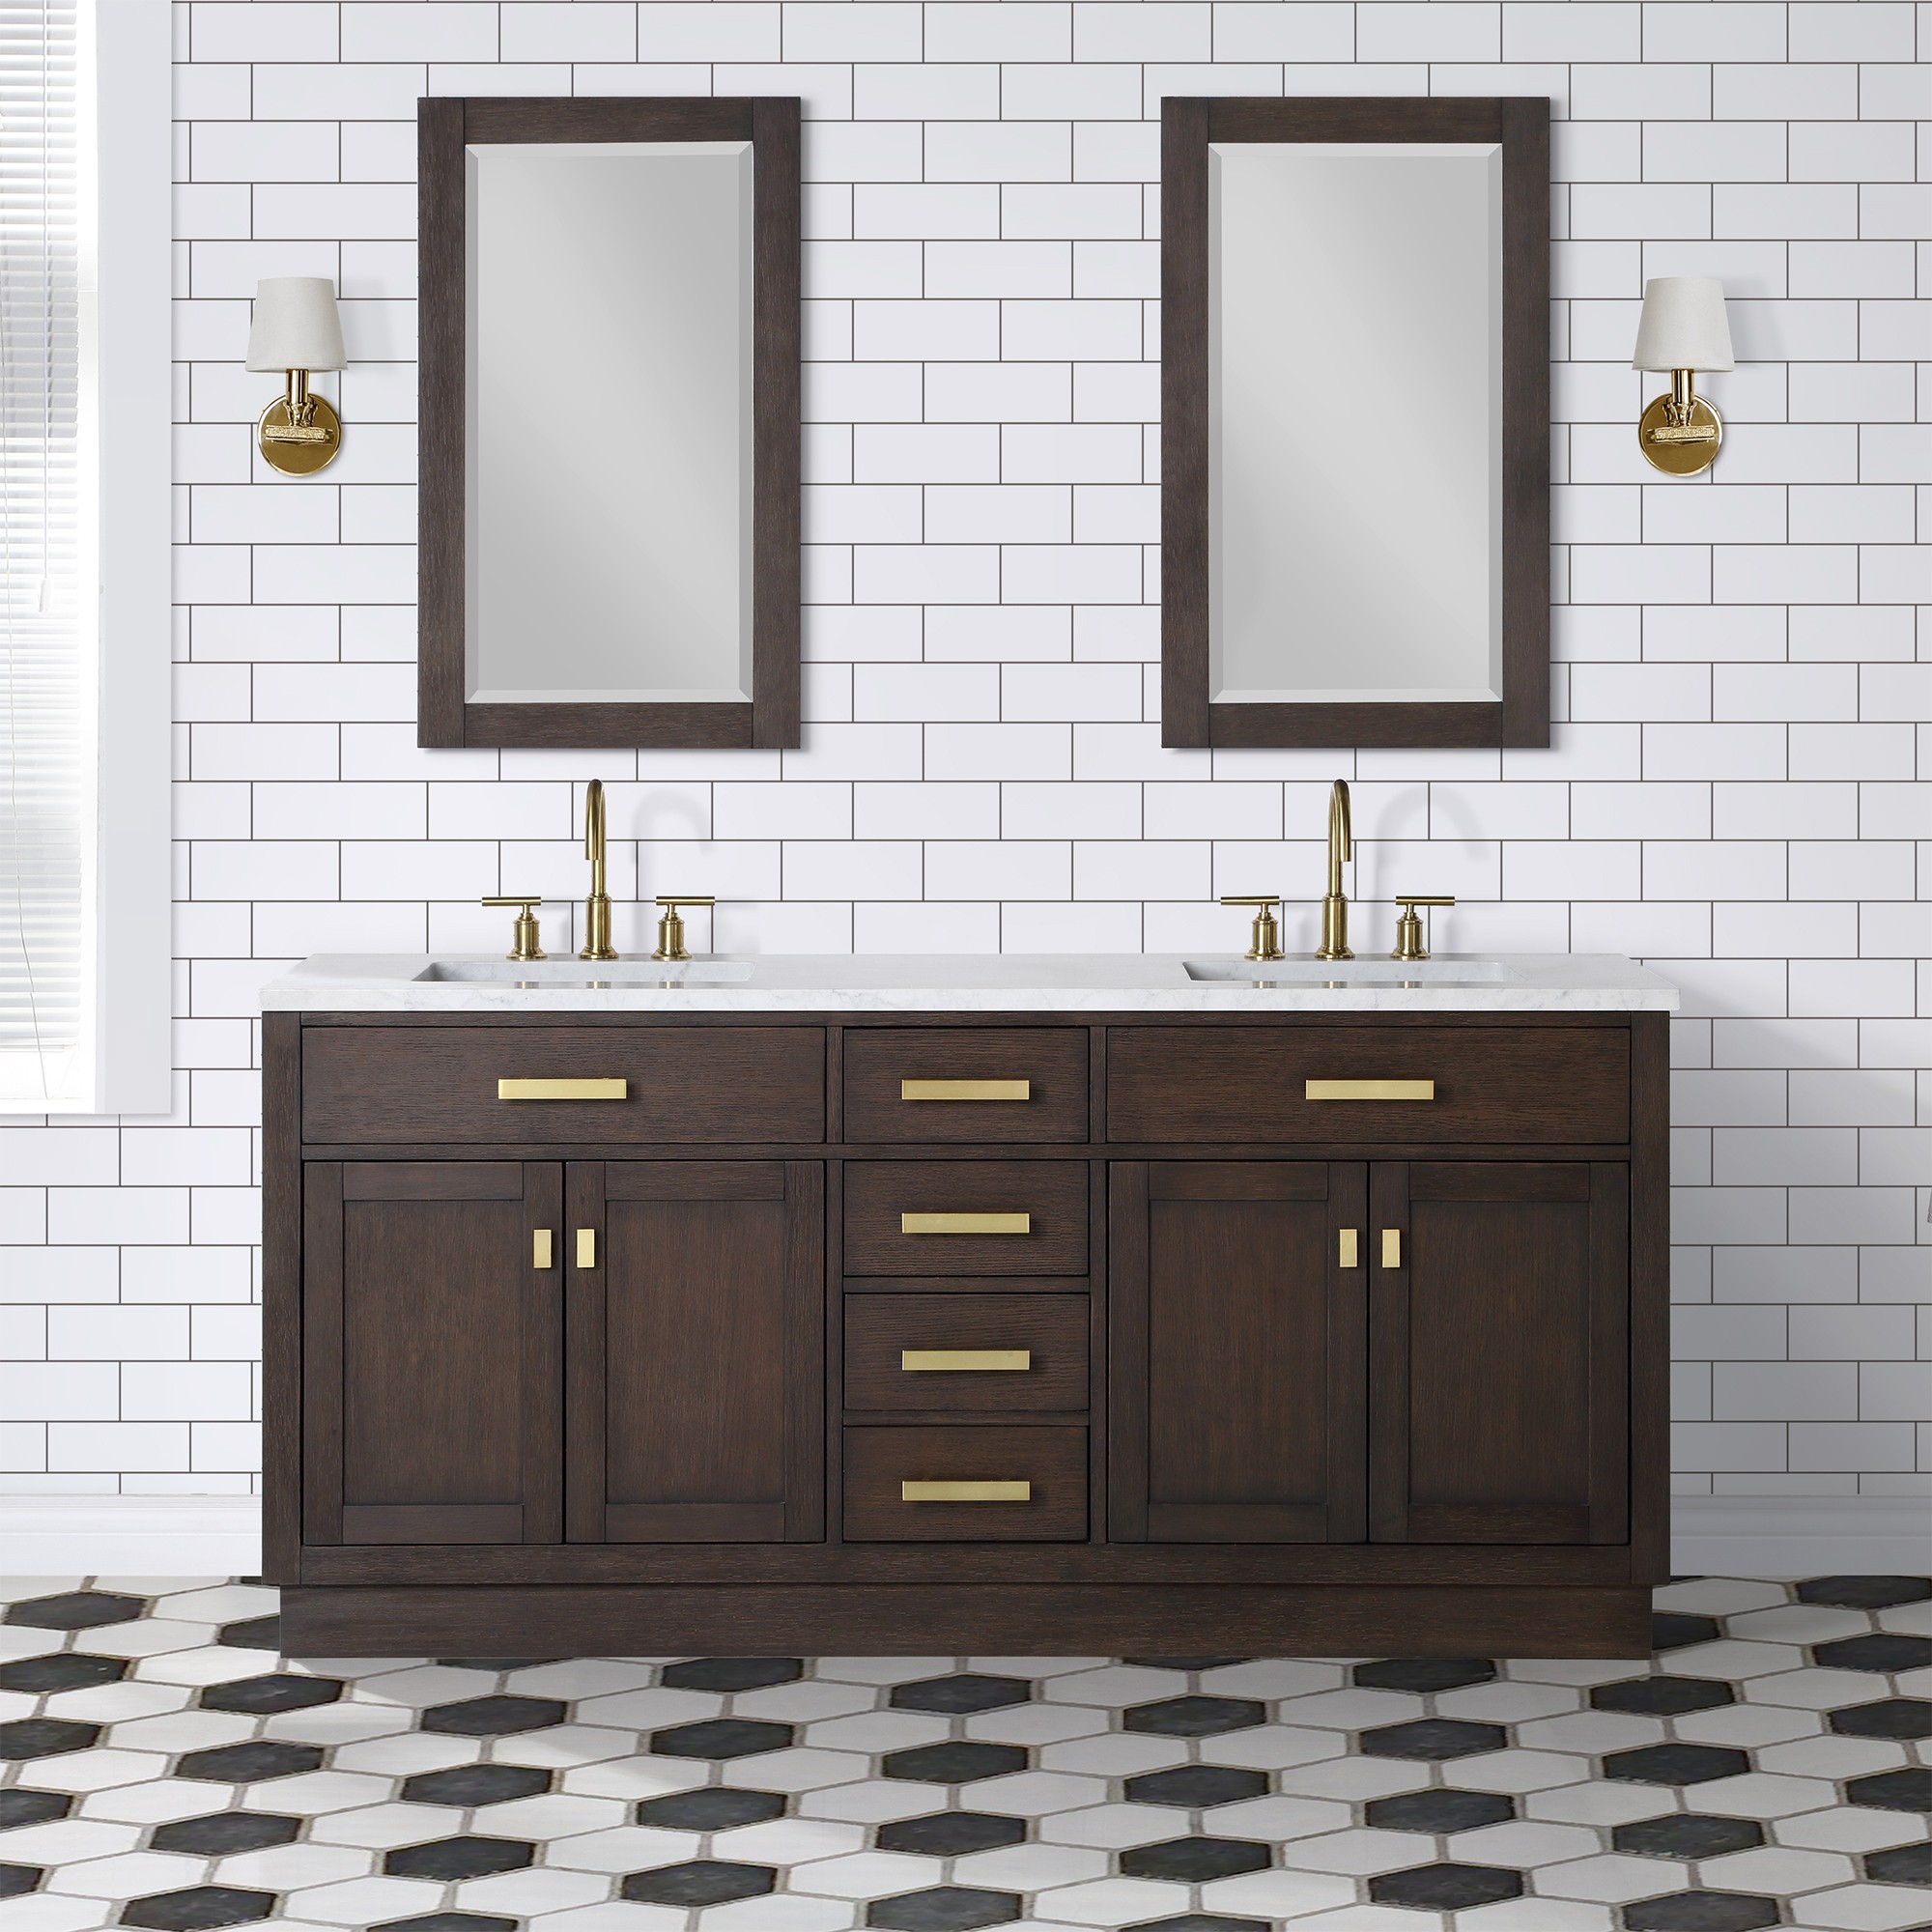 WATER-CREATION CH72CW06BK-R21000000 CHESTNUT 72 INCH DOUBLE BATHROOM VANITY WITH MIRRORS IN BROWN OAK